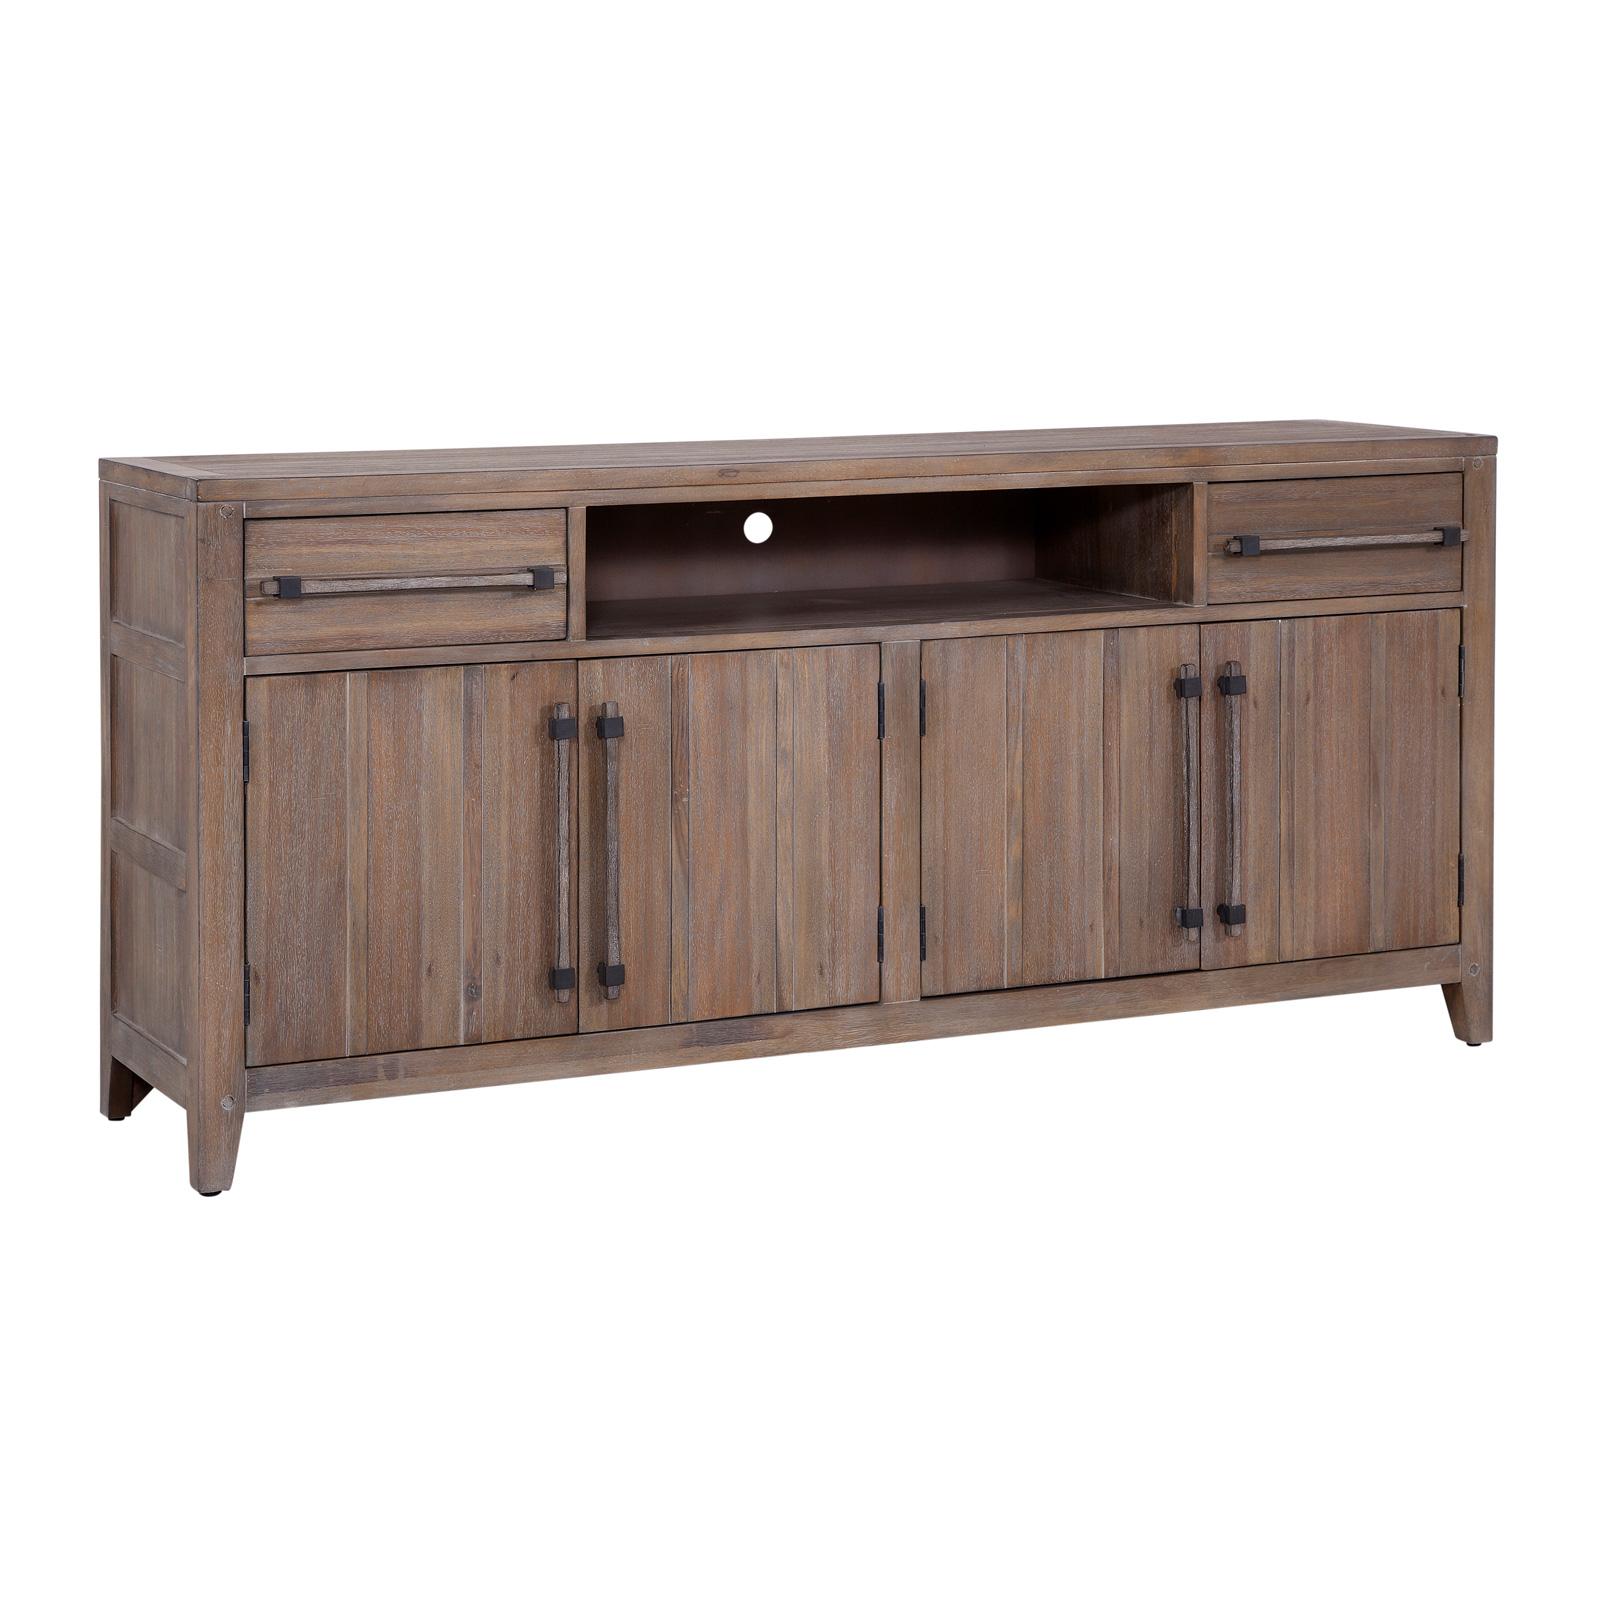 American Woodcrafters AURORA 2800-224 Tv Console